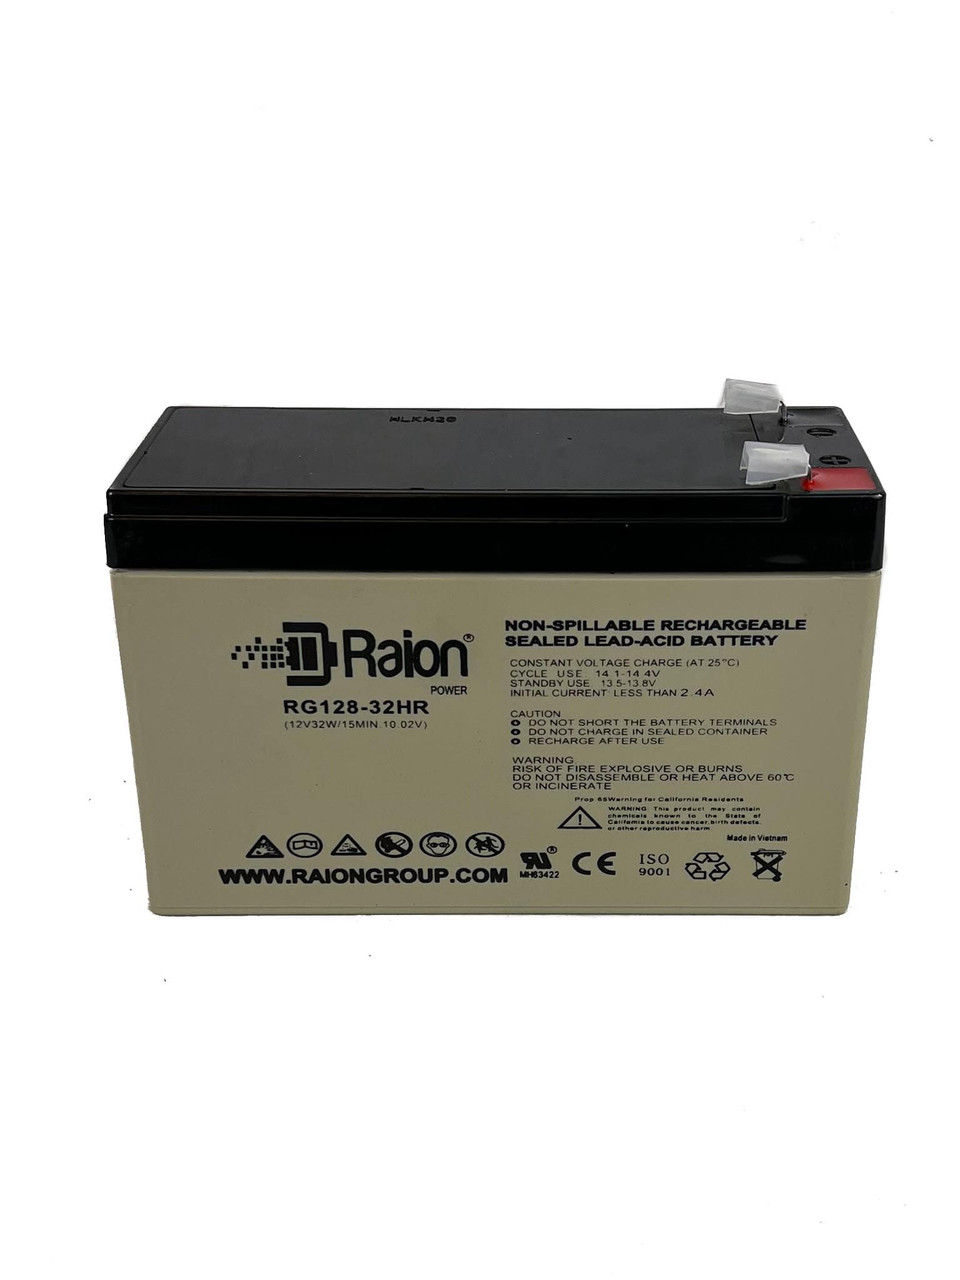 Raion Power RG128-32HR Replacement High Rate Battery Cartridge for Powerware PW3110-550iVA